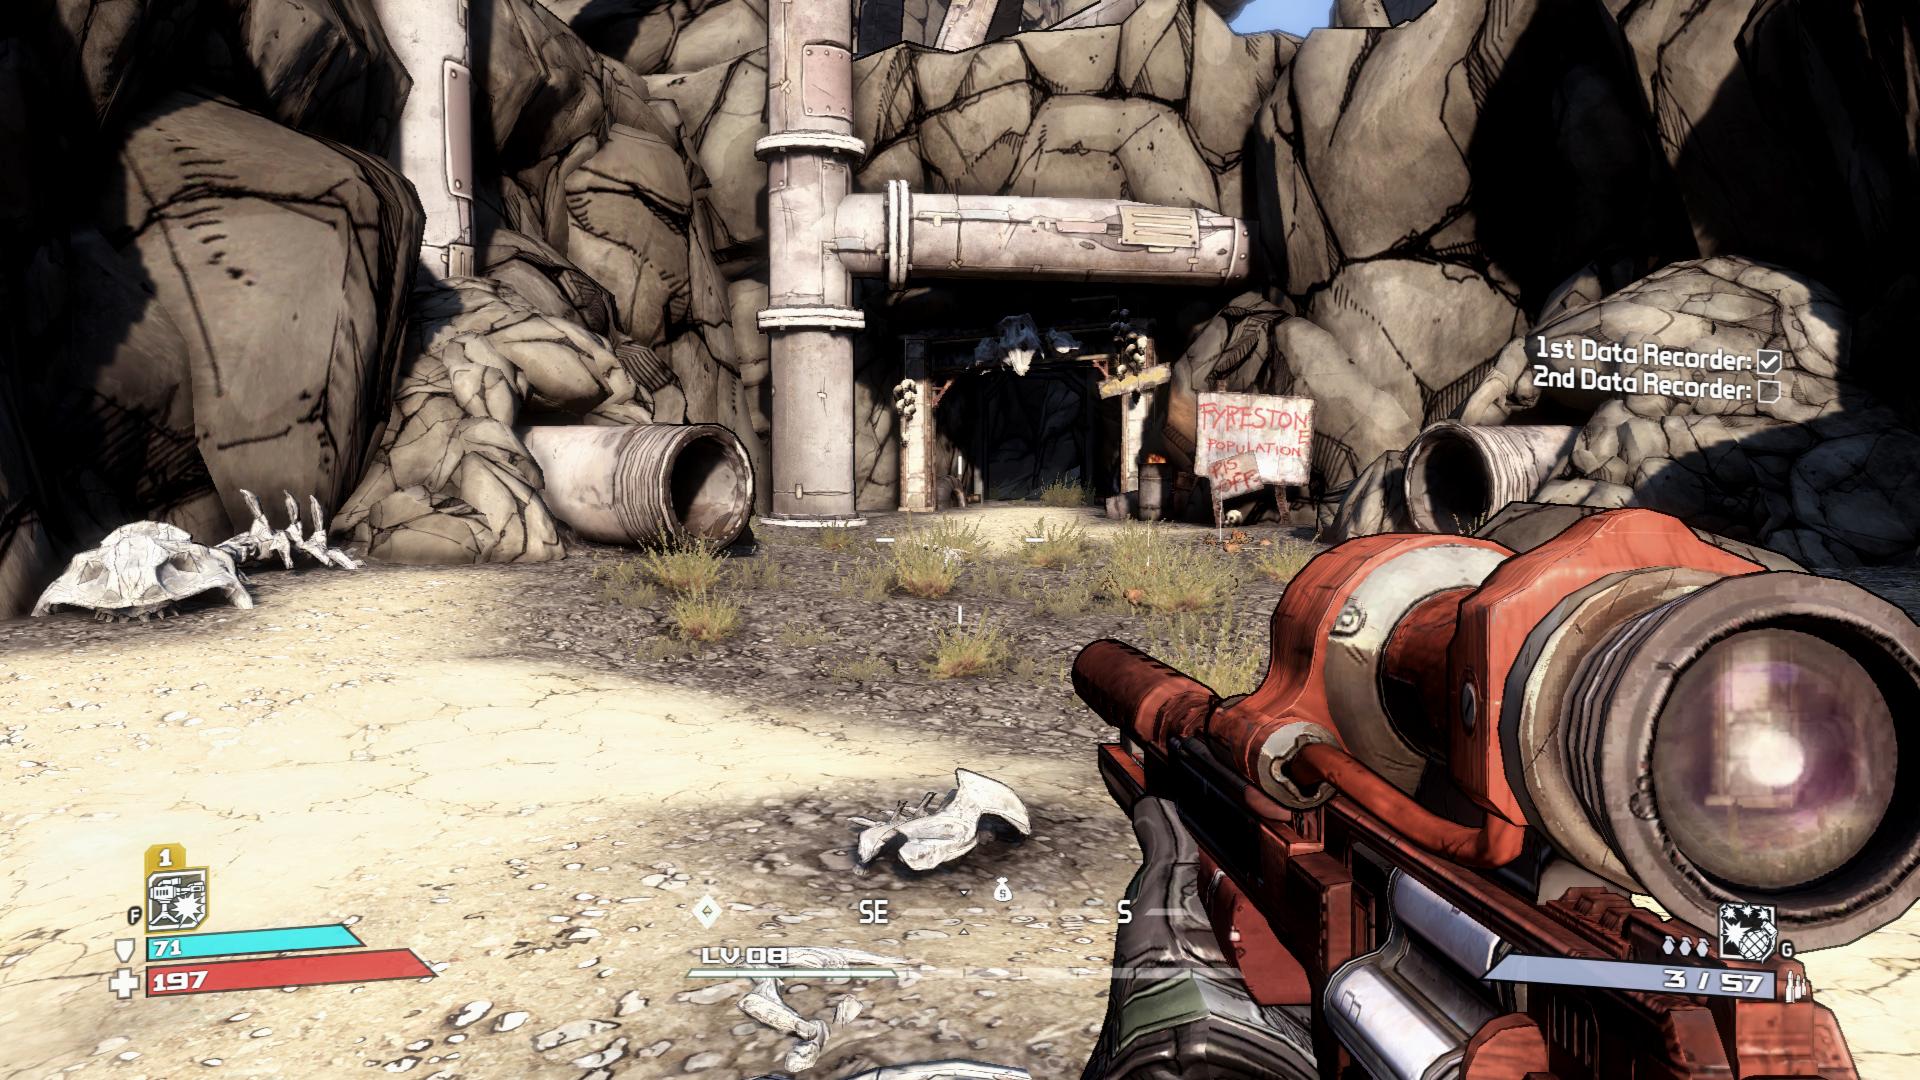 Borderlands Ultra Hd Screenshots General Discussion The Official Gearbox Software Forums